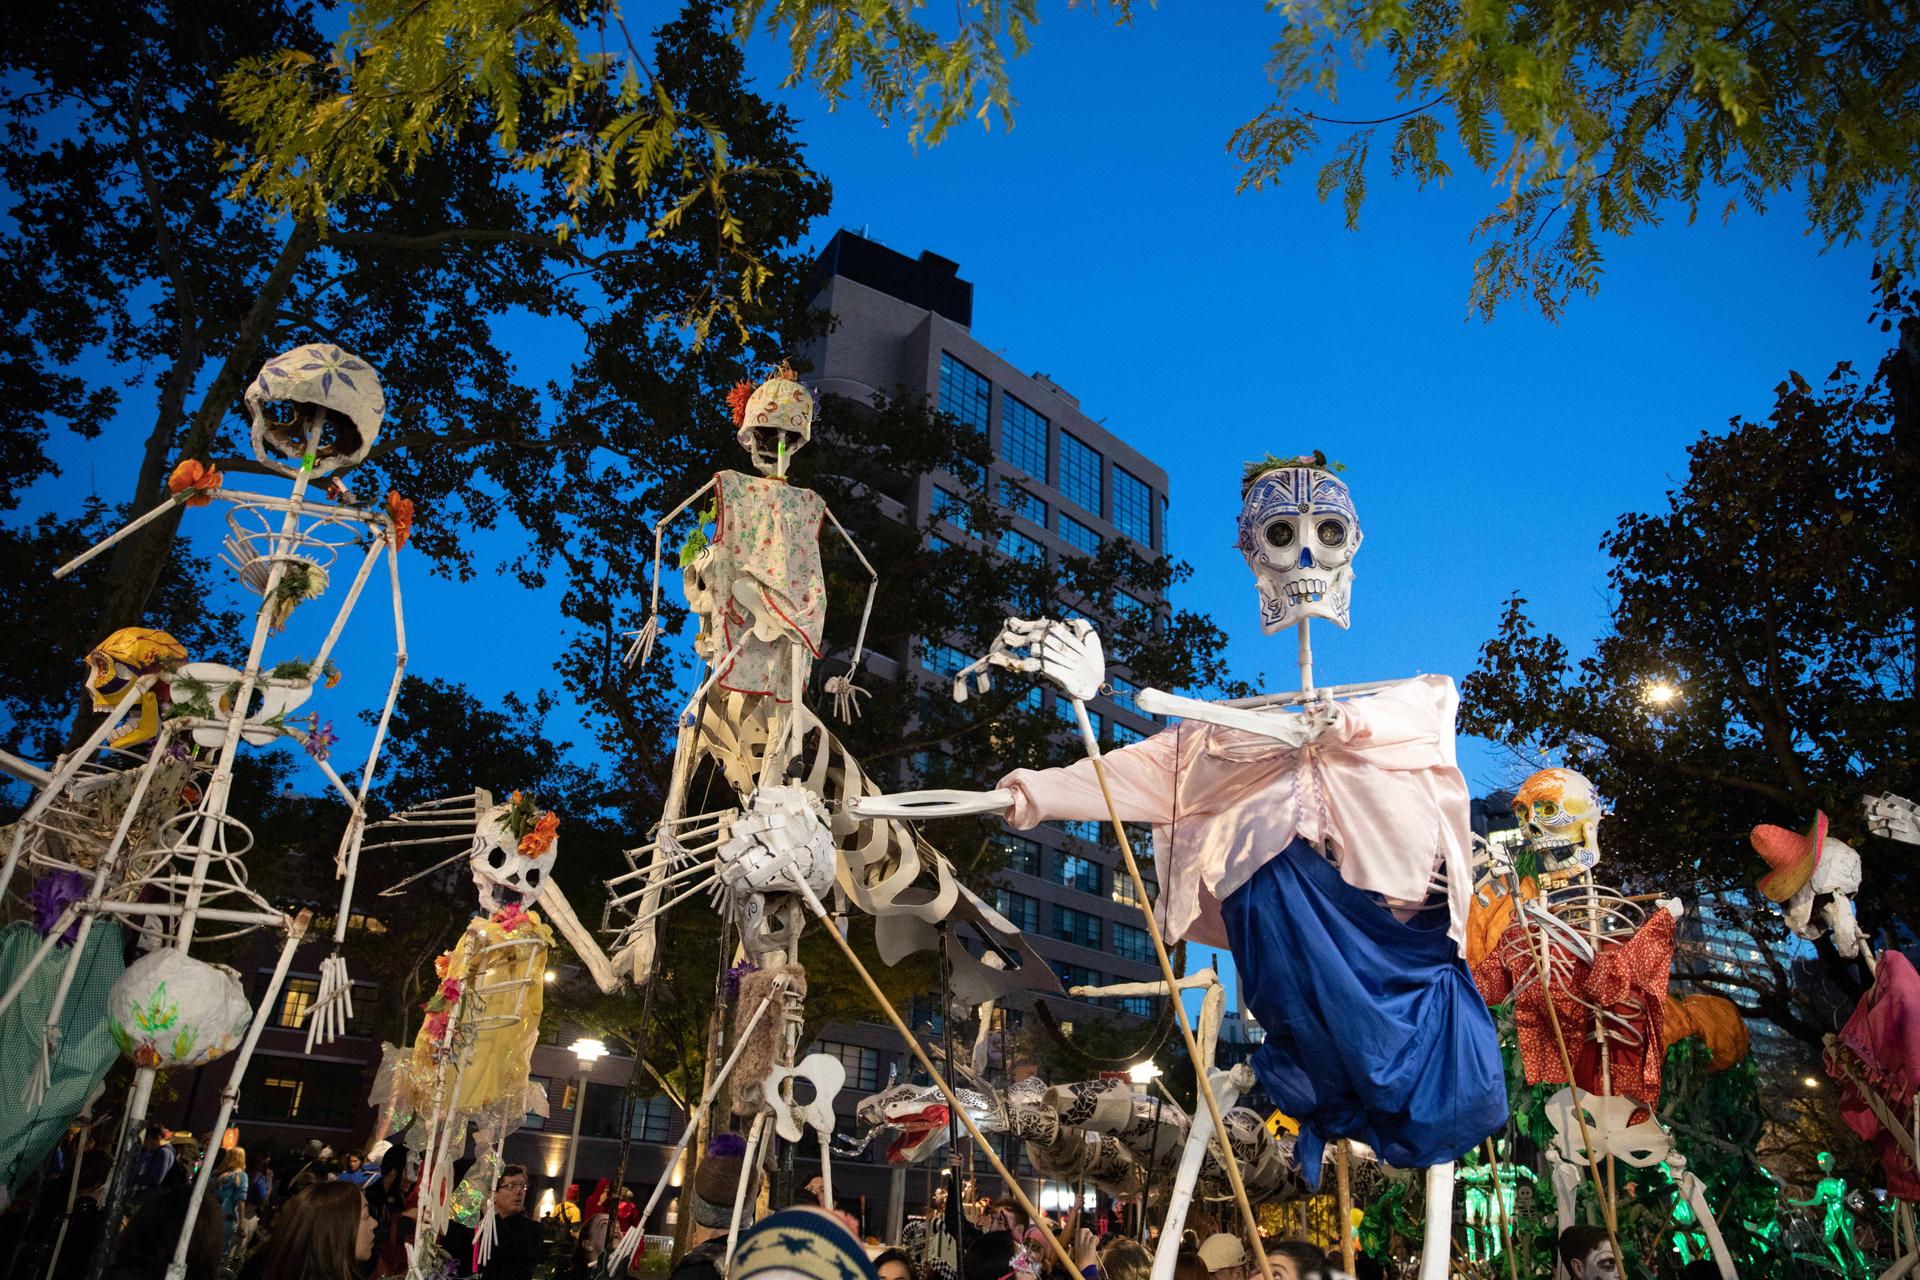 skeletons against blue skies at the halloween parade